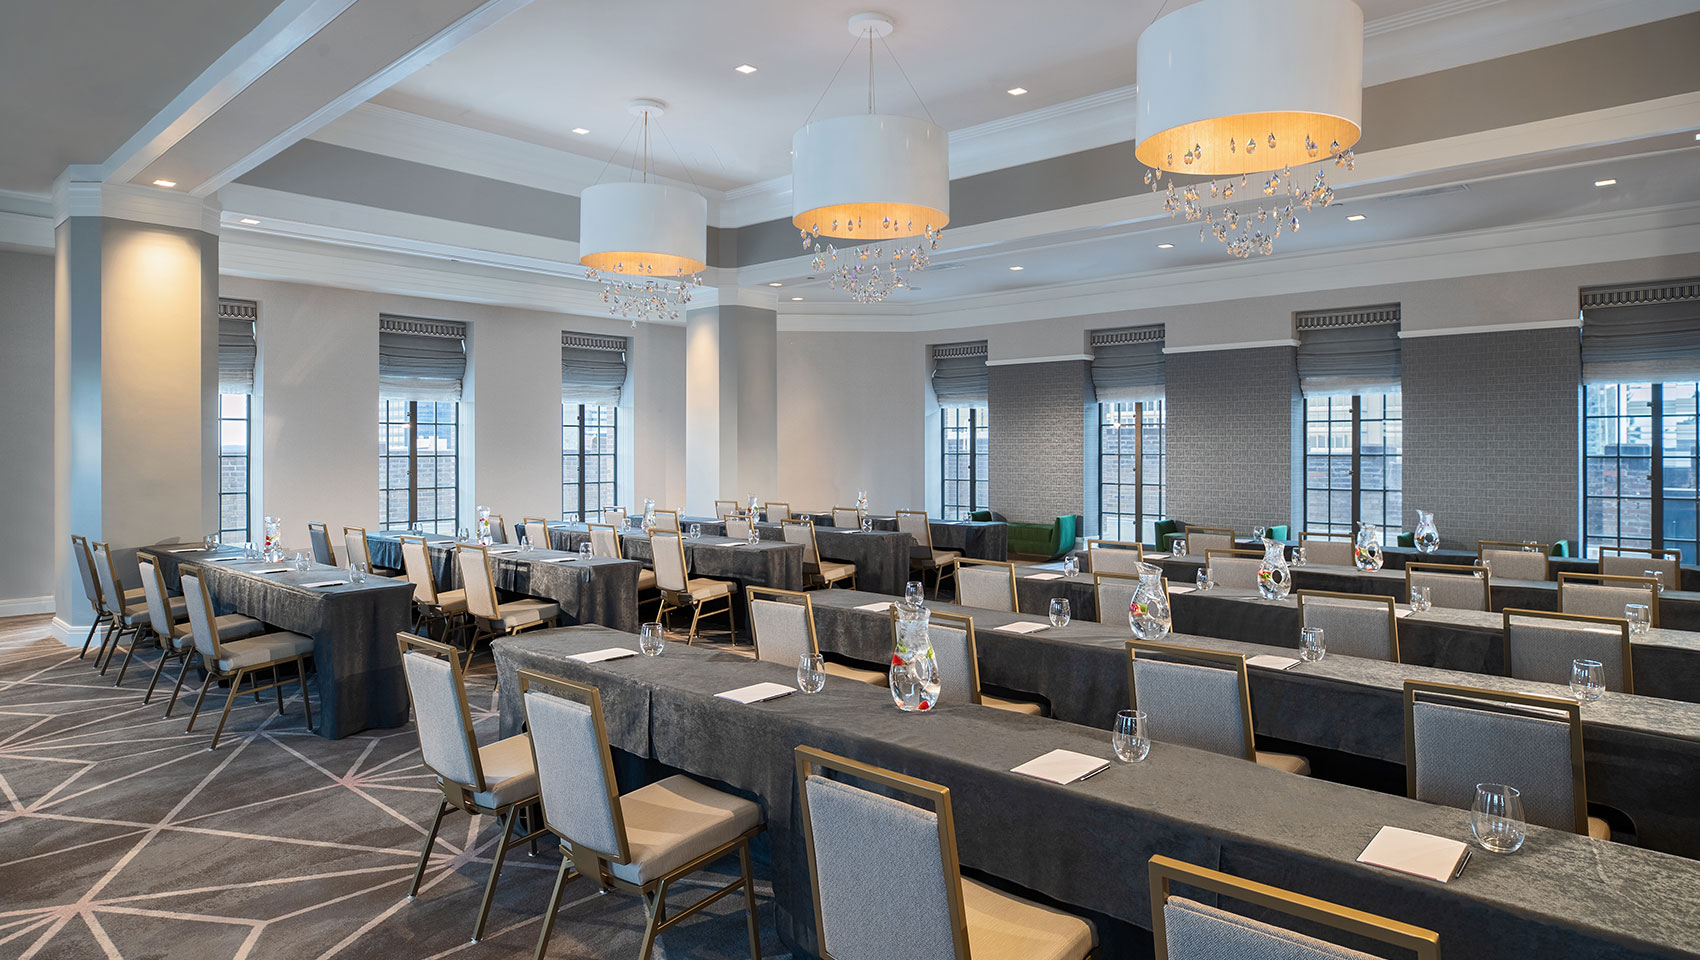 Classroom setup at Kimpton Hotel Palomar Philadelphia’s ballroom showing long tables with notepads all facing the same direction within a room surrounded with windows that overlook city views